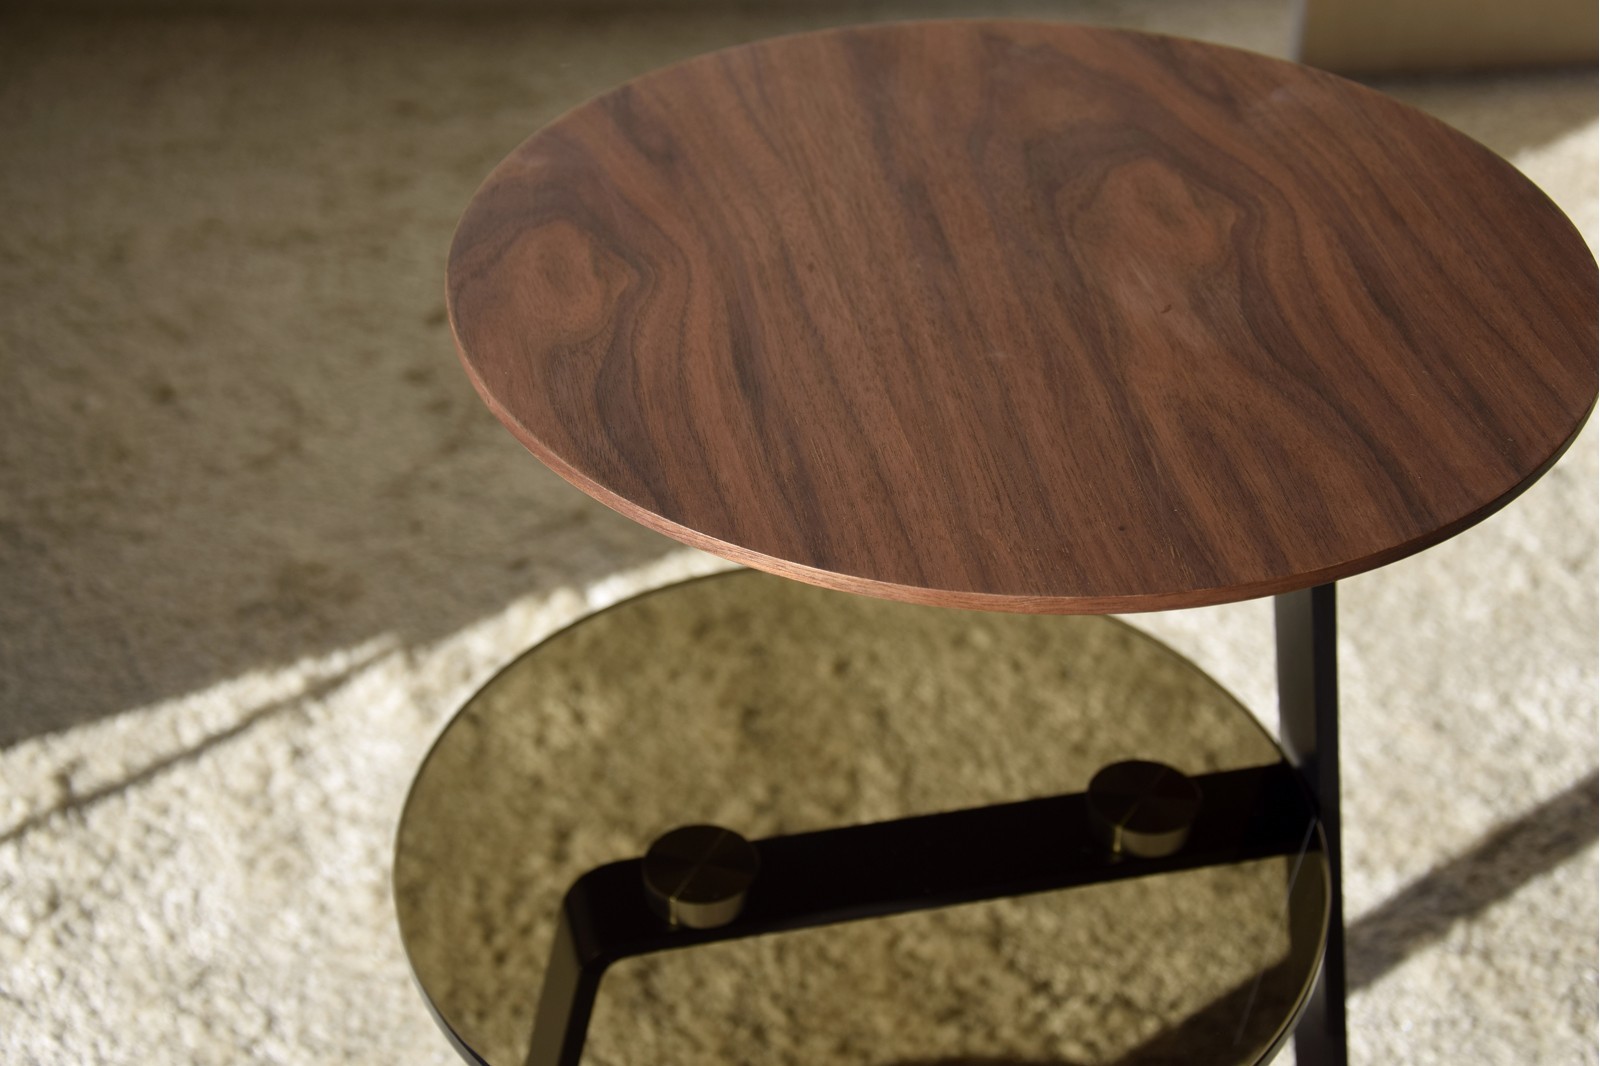 SIDE TABLE WALNUT TEMPERED GLASS AND METAL